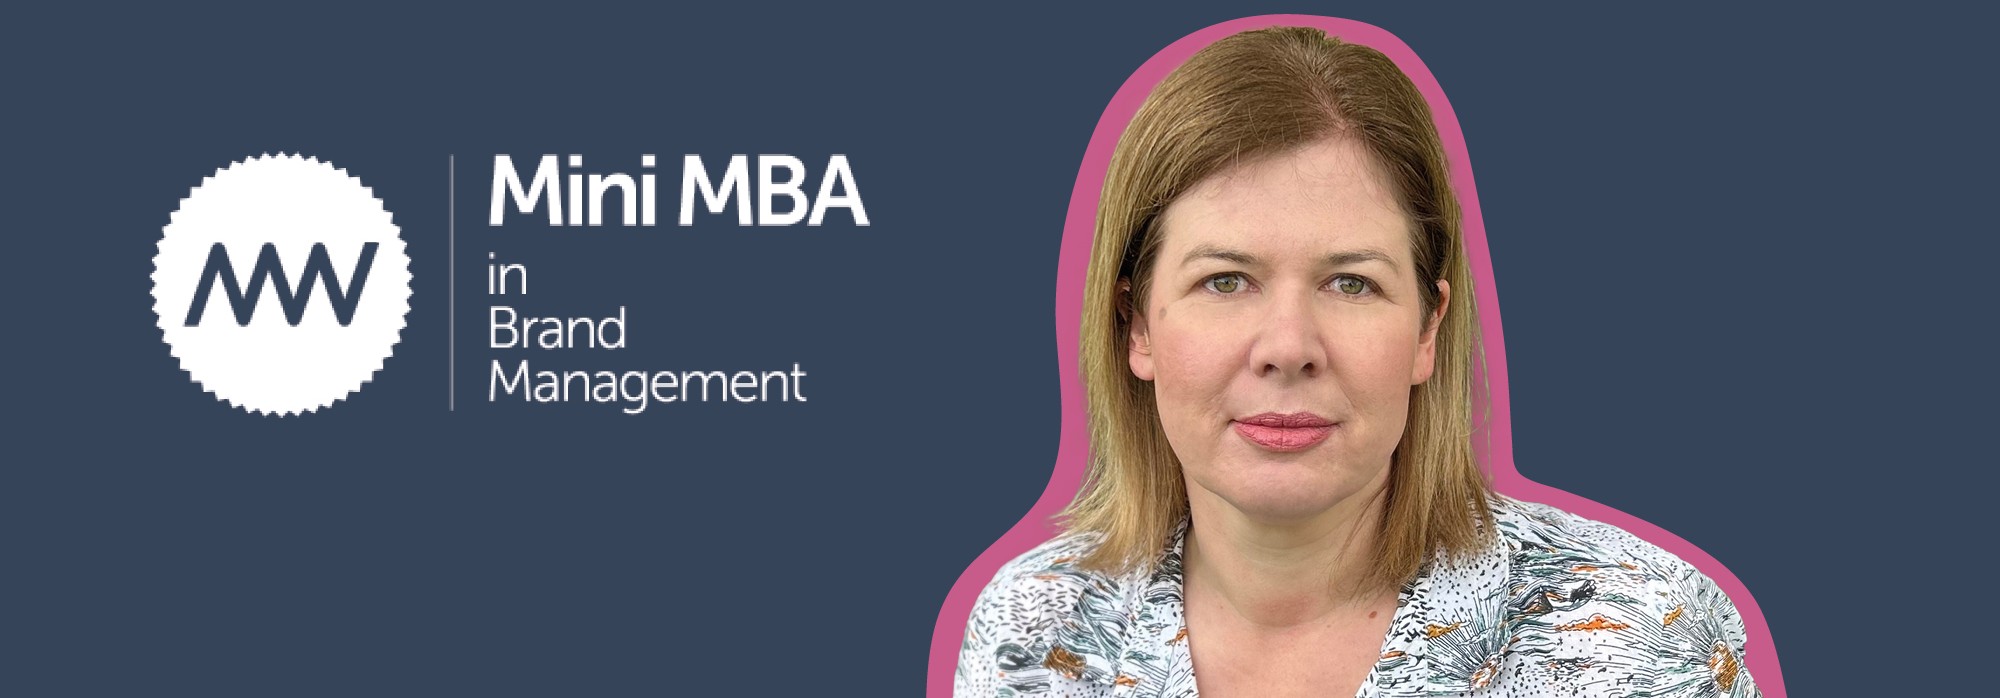 Becca Davidson Completes the Mini MBA in Brand Management